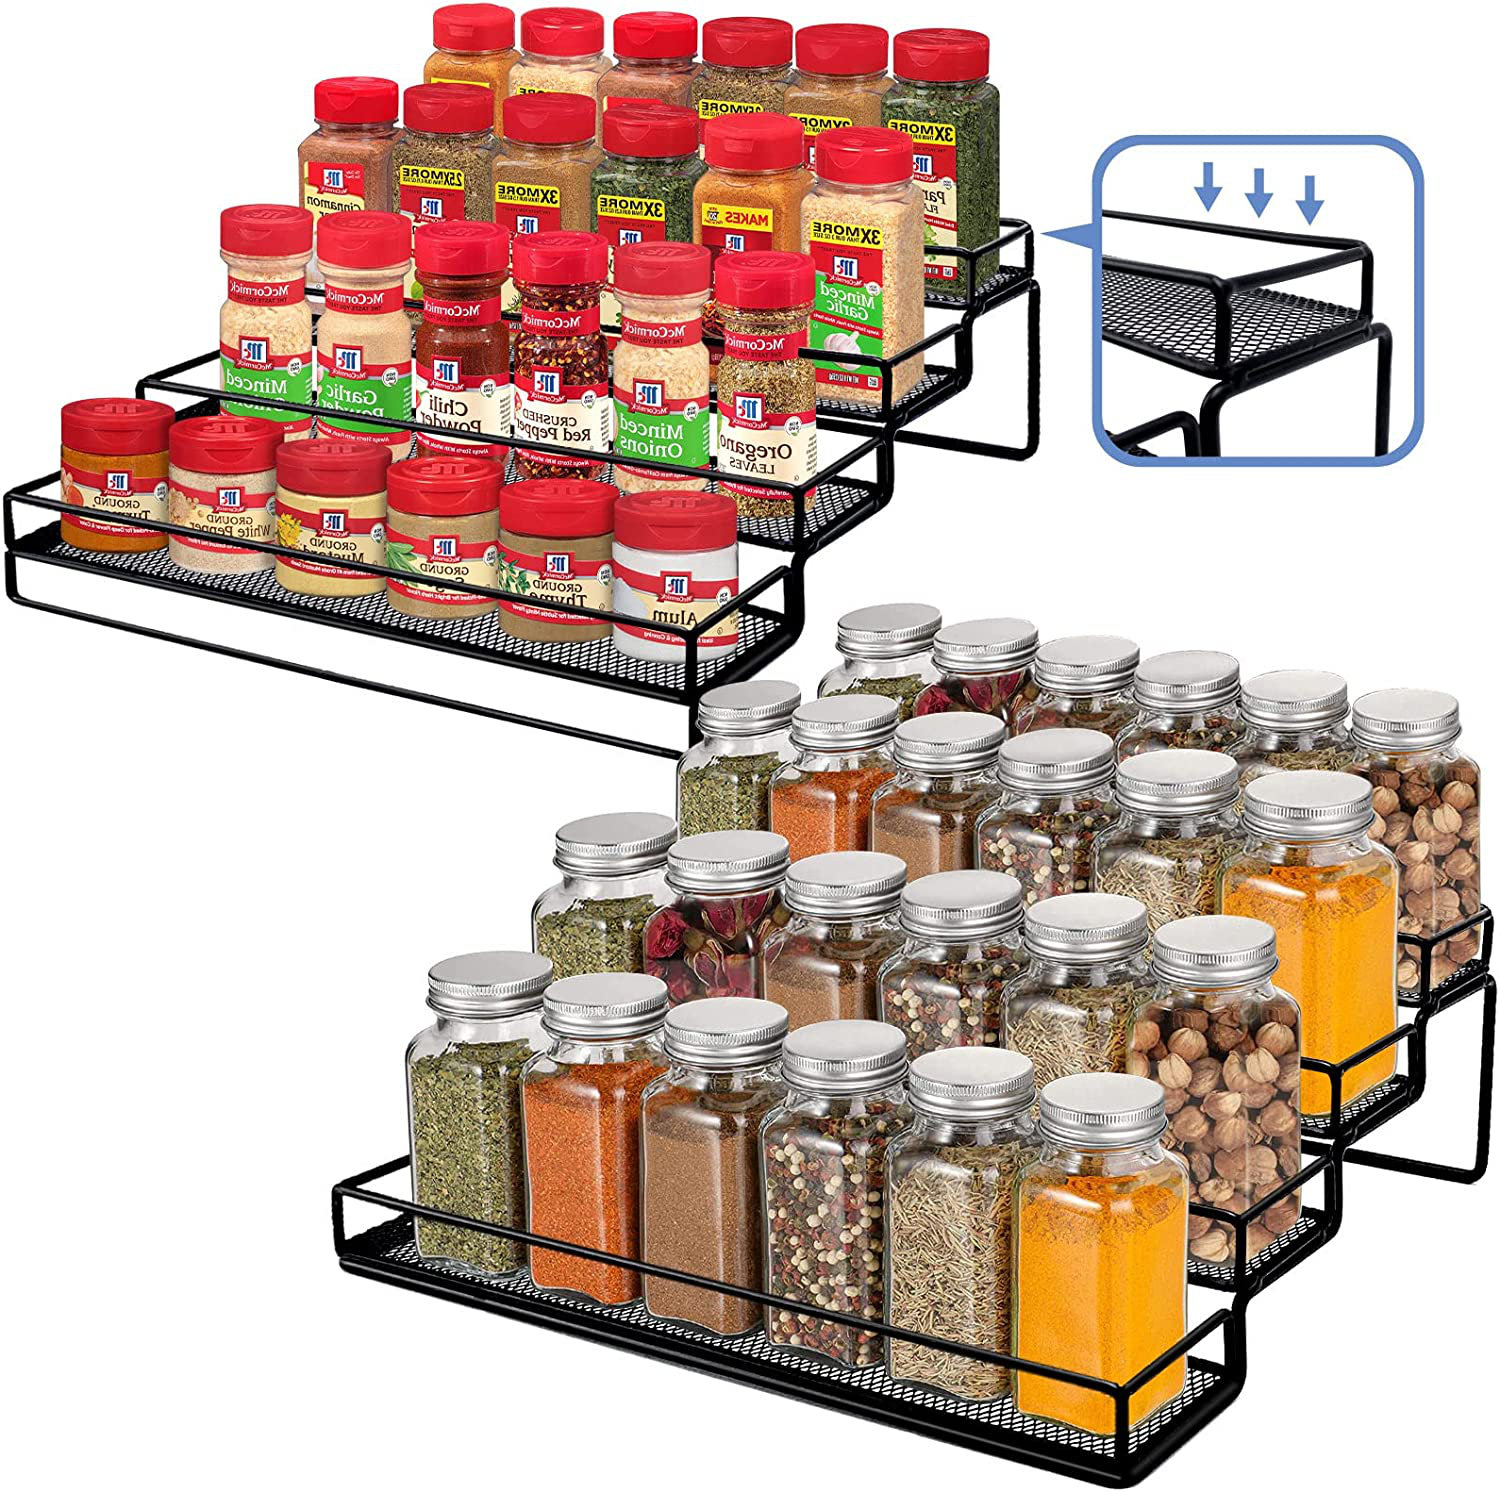 Home Hero Spice Rack Organizer - 24 Jars, 3 Spice Racks, 250 Labels, Iron  and Wooden Construction, Ideal Housewarming Gift